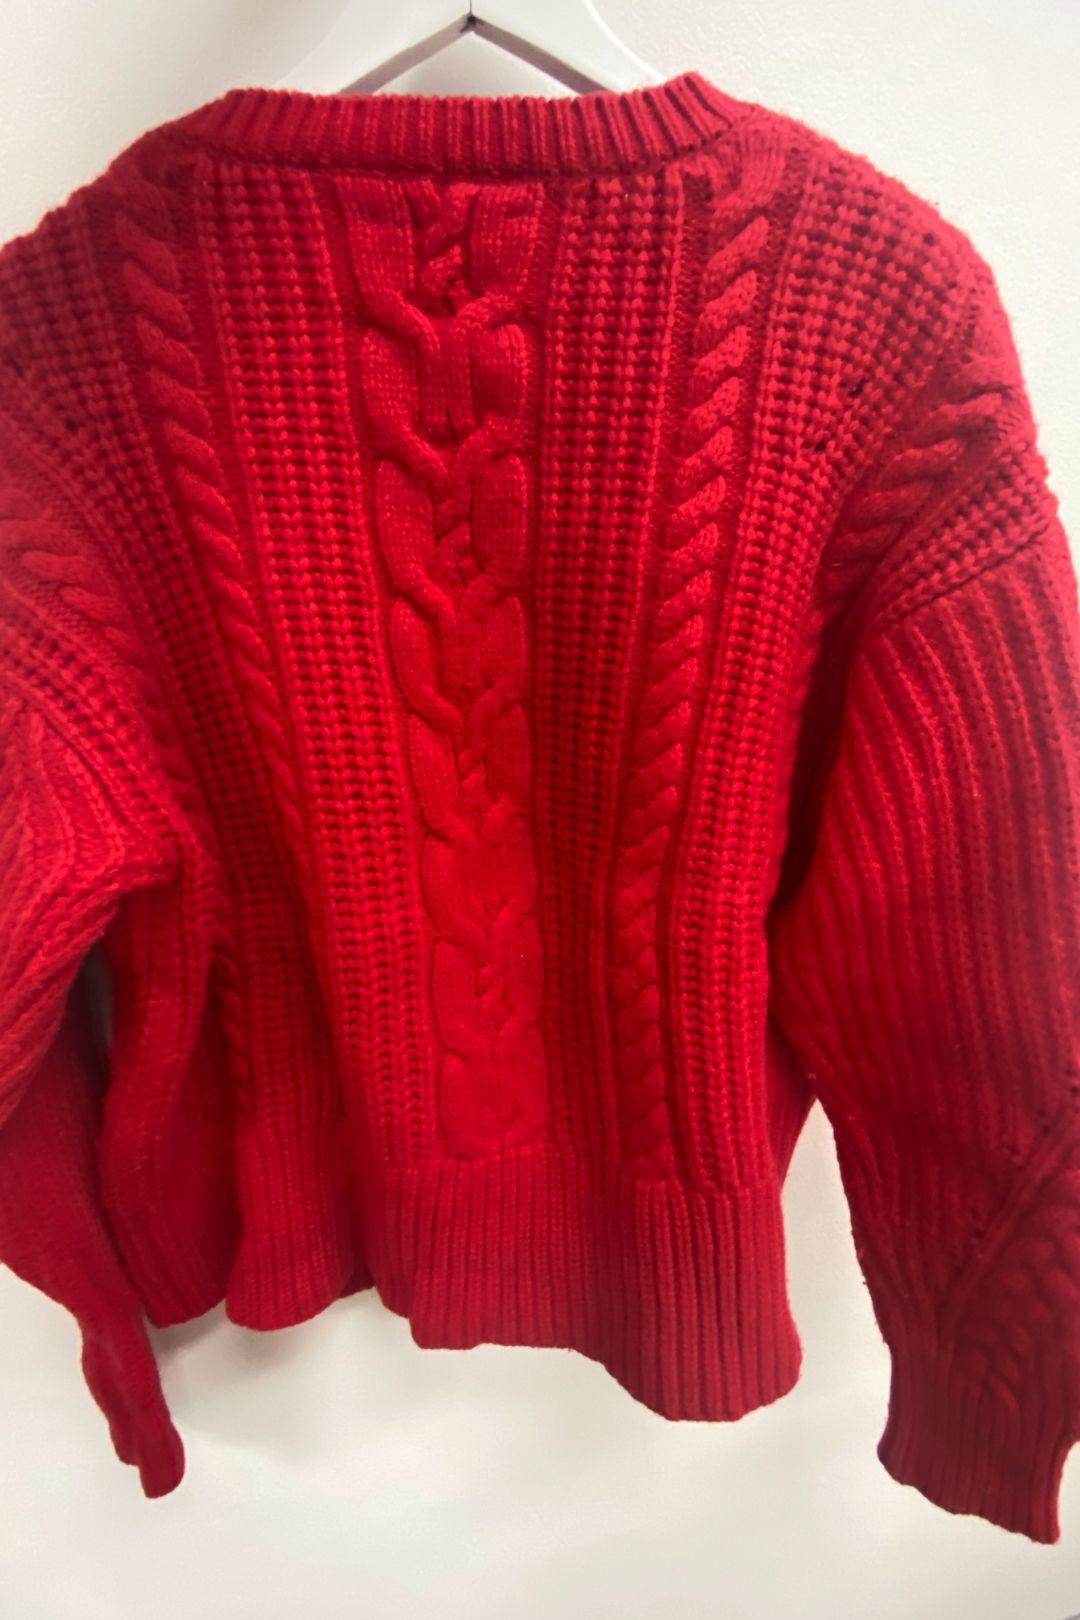 Country Road Red Merino Wool Cable Swing Knit Jumper